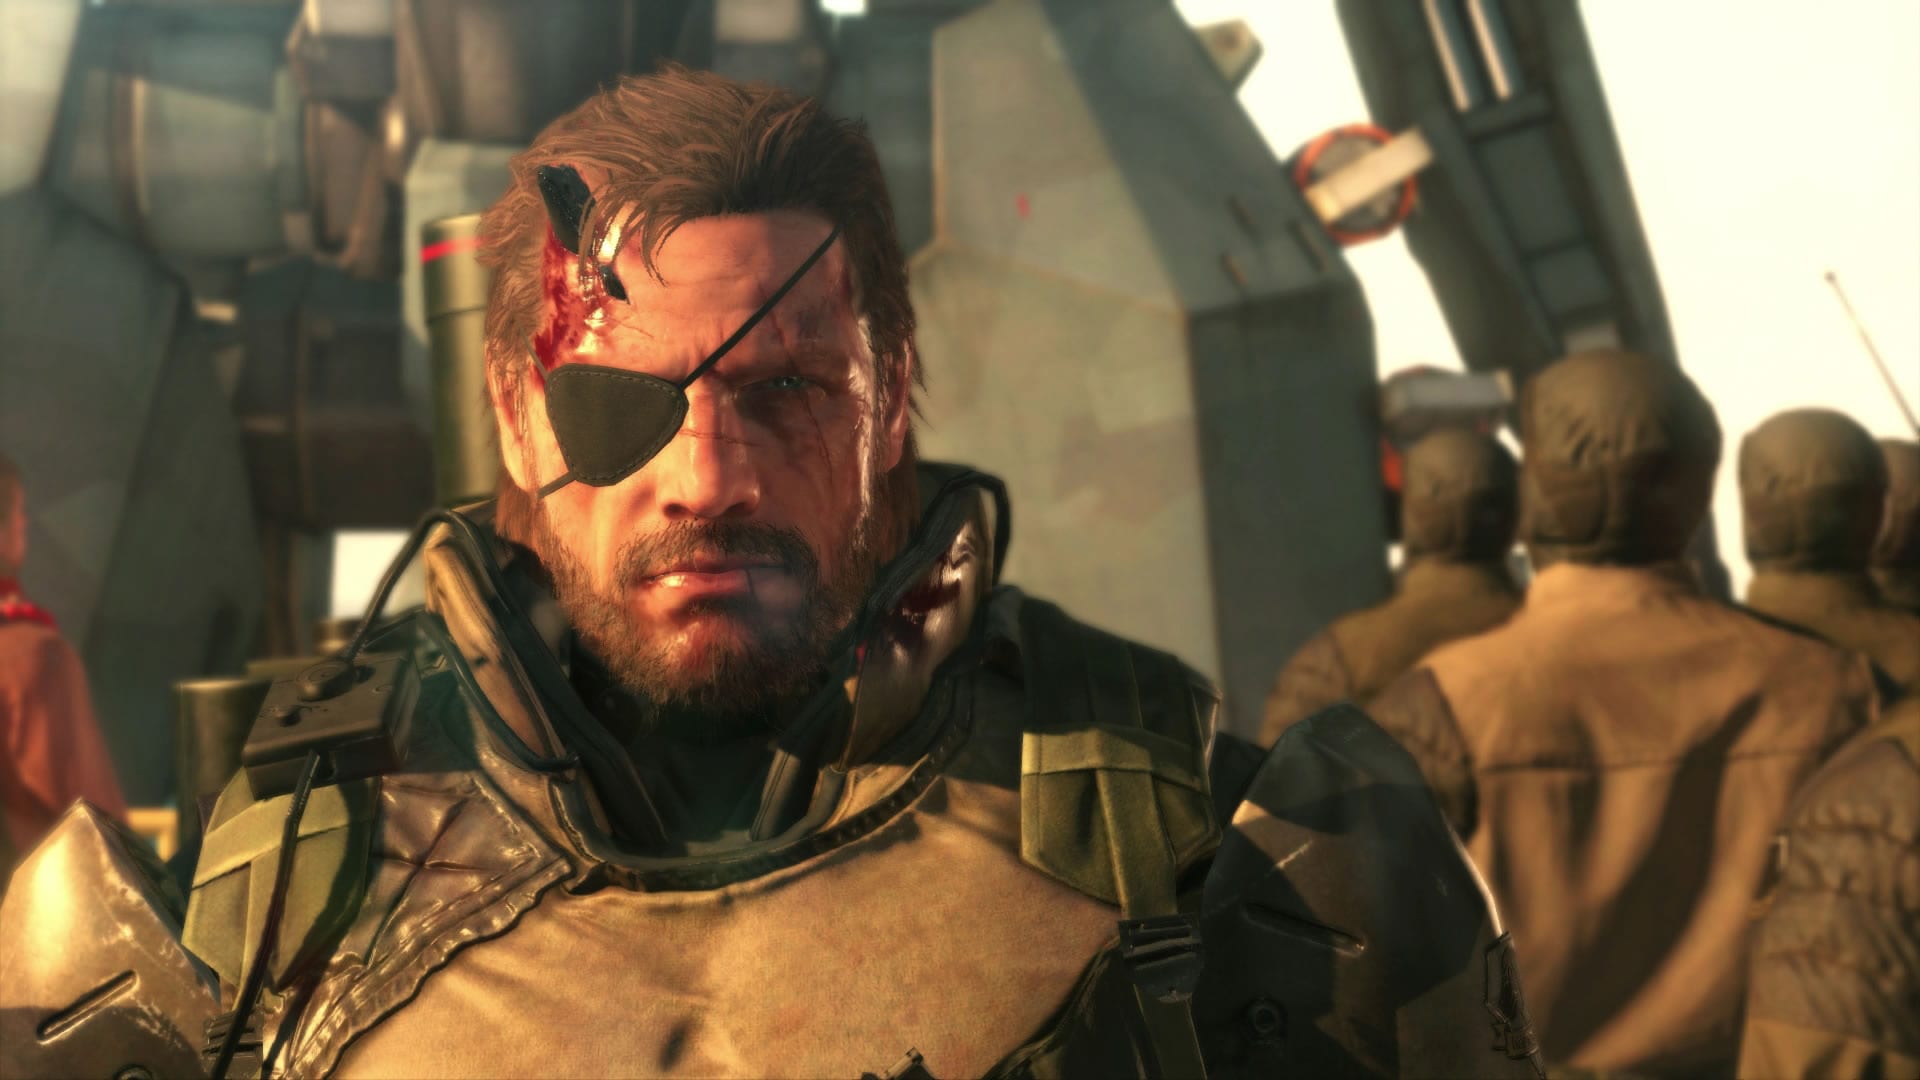 Metal Gear Solid V: The Phantom Pain Update 1.09 is Live, Adds Survival Mode